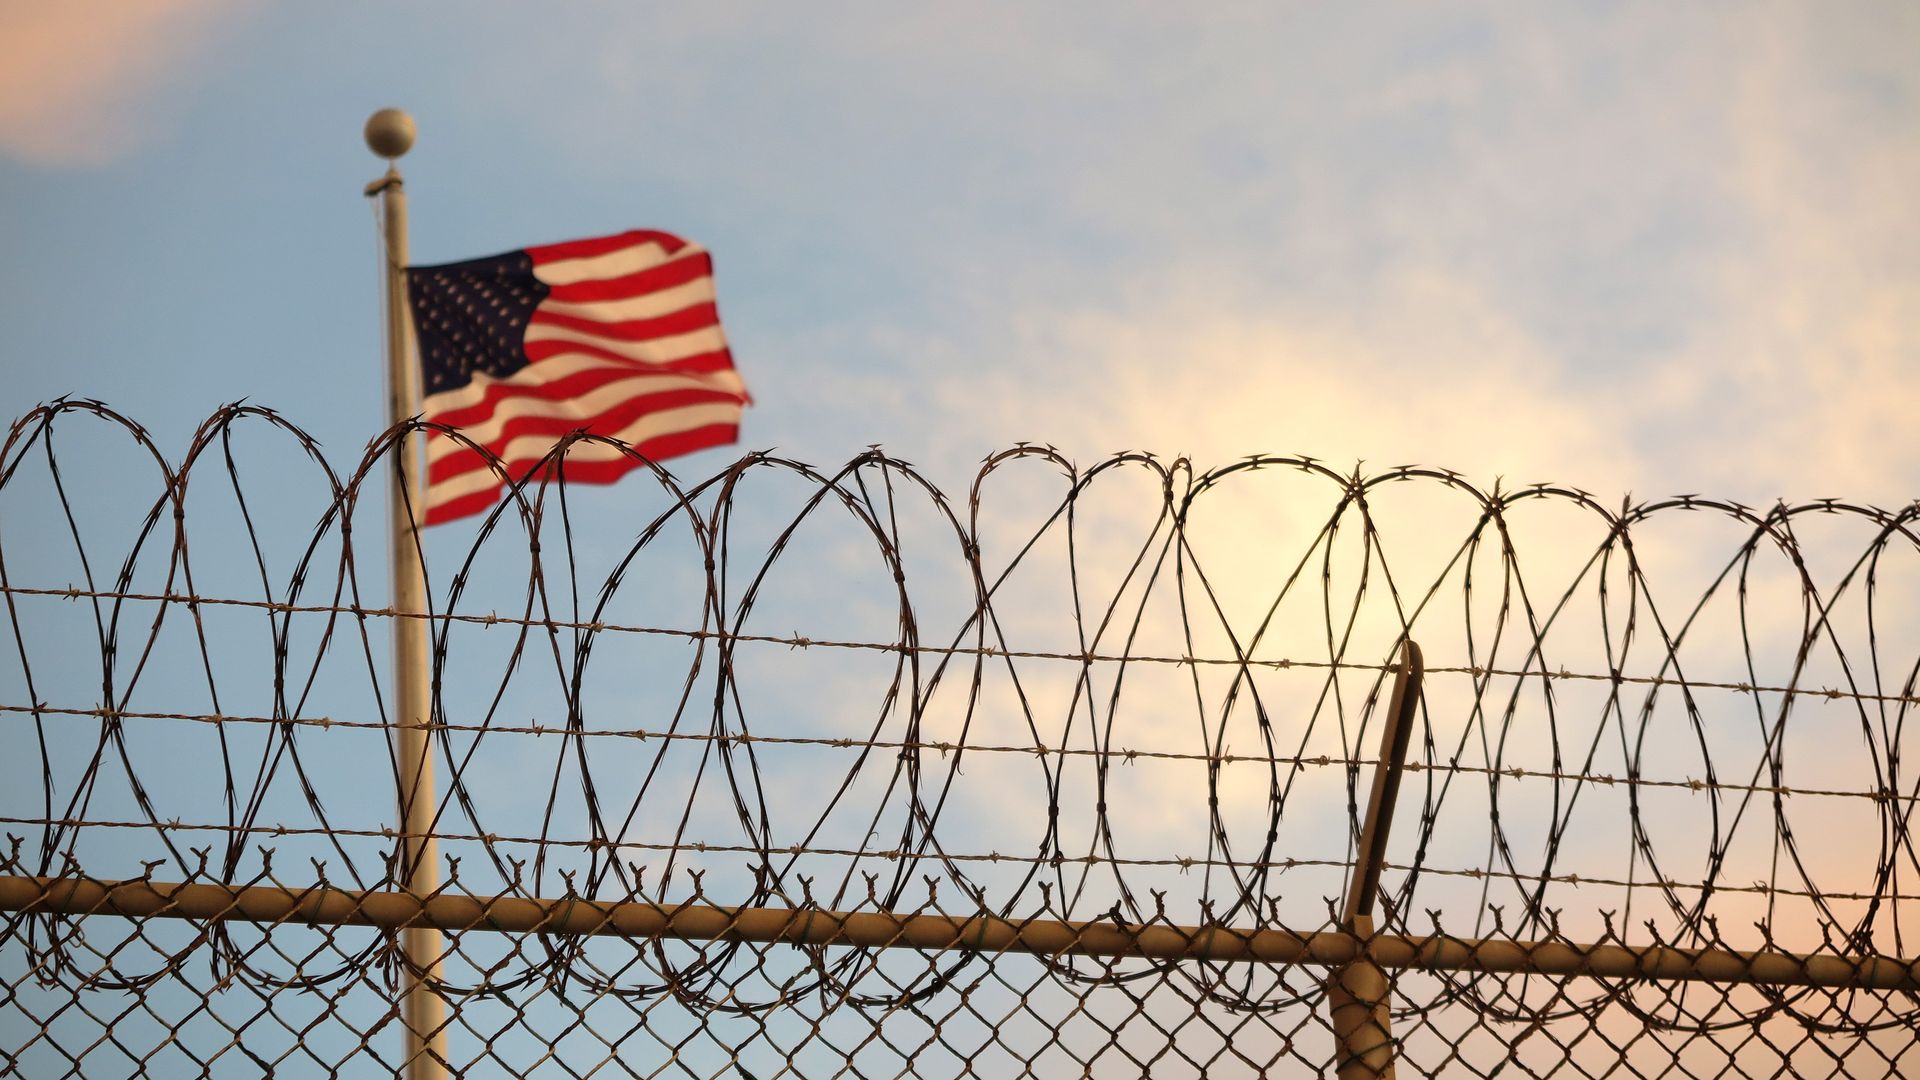 16 October 2018, Cuba, Guantanamo Bay: A US-American flag blows behind a barbed wire fence in the wind. 